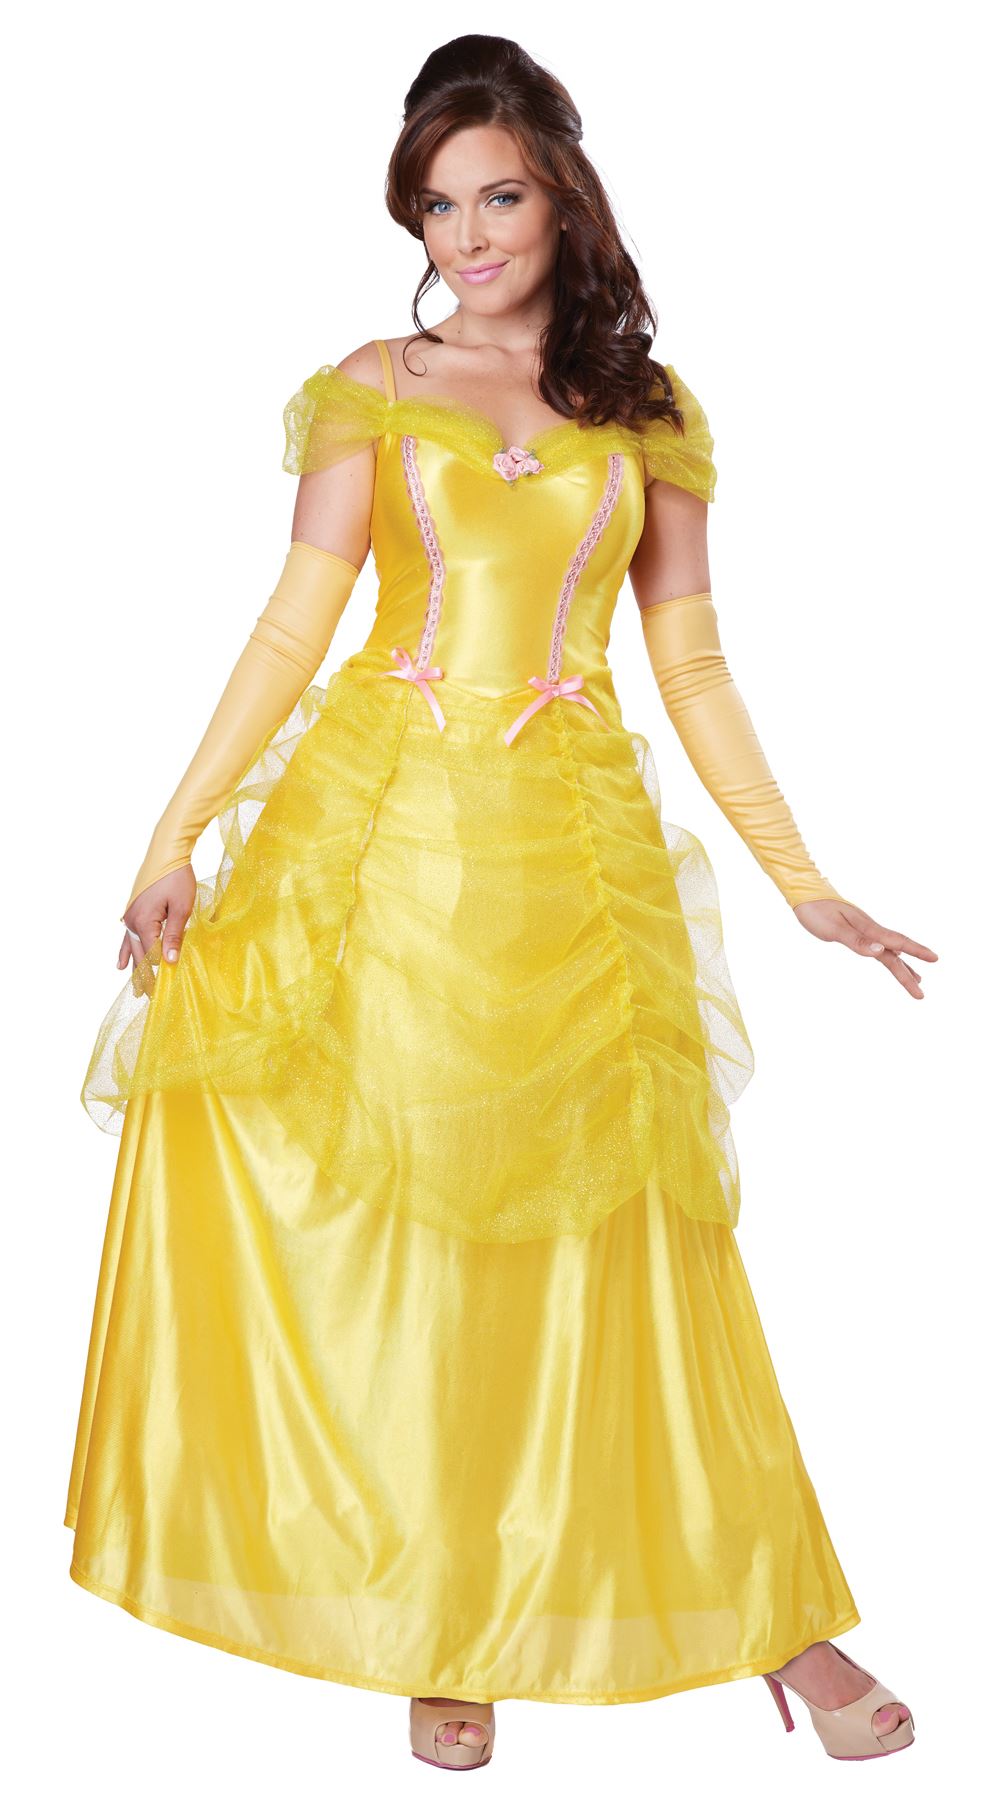 Classic Beauty Woman Fairy Tales Halloween Costume | $29.99 | The ...